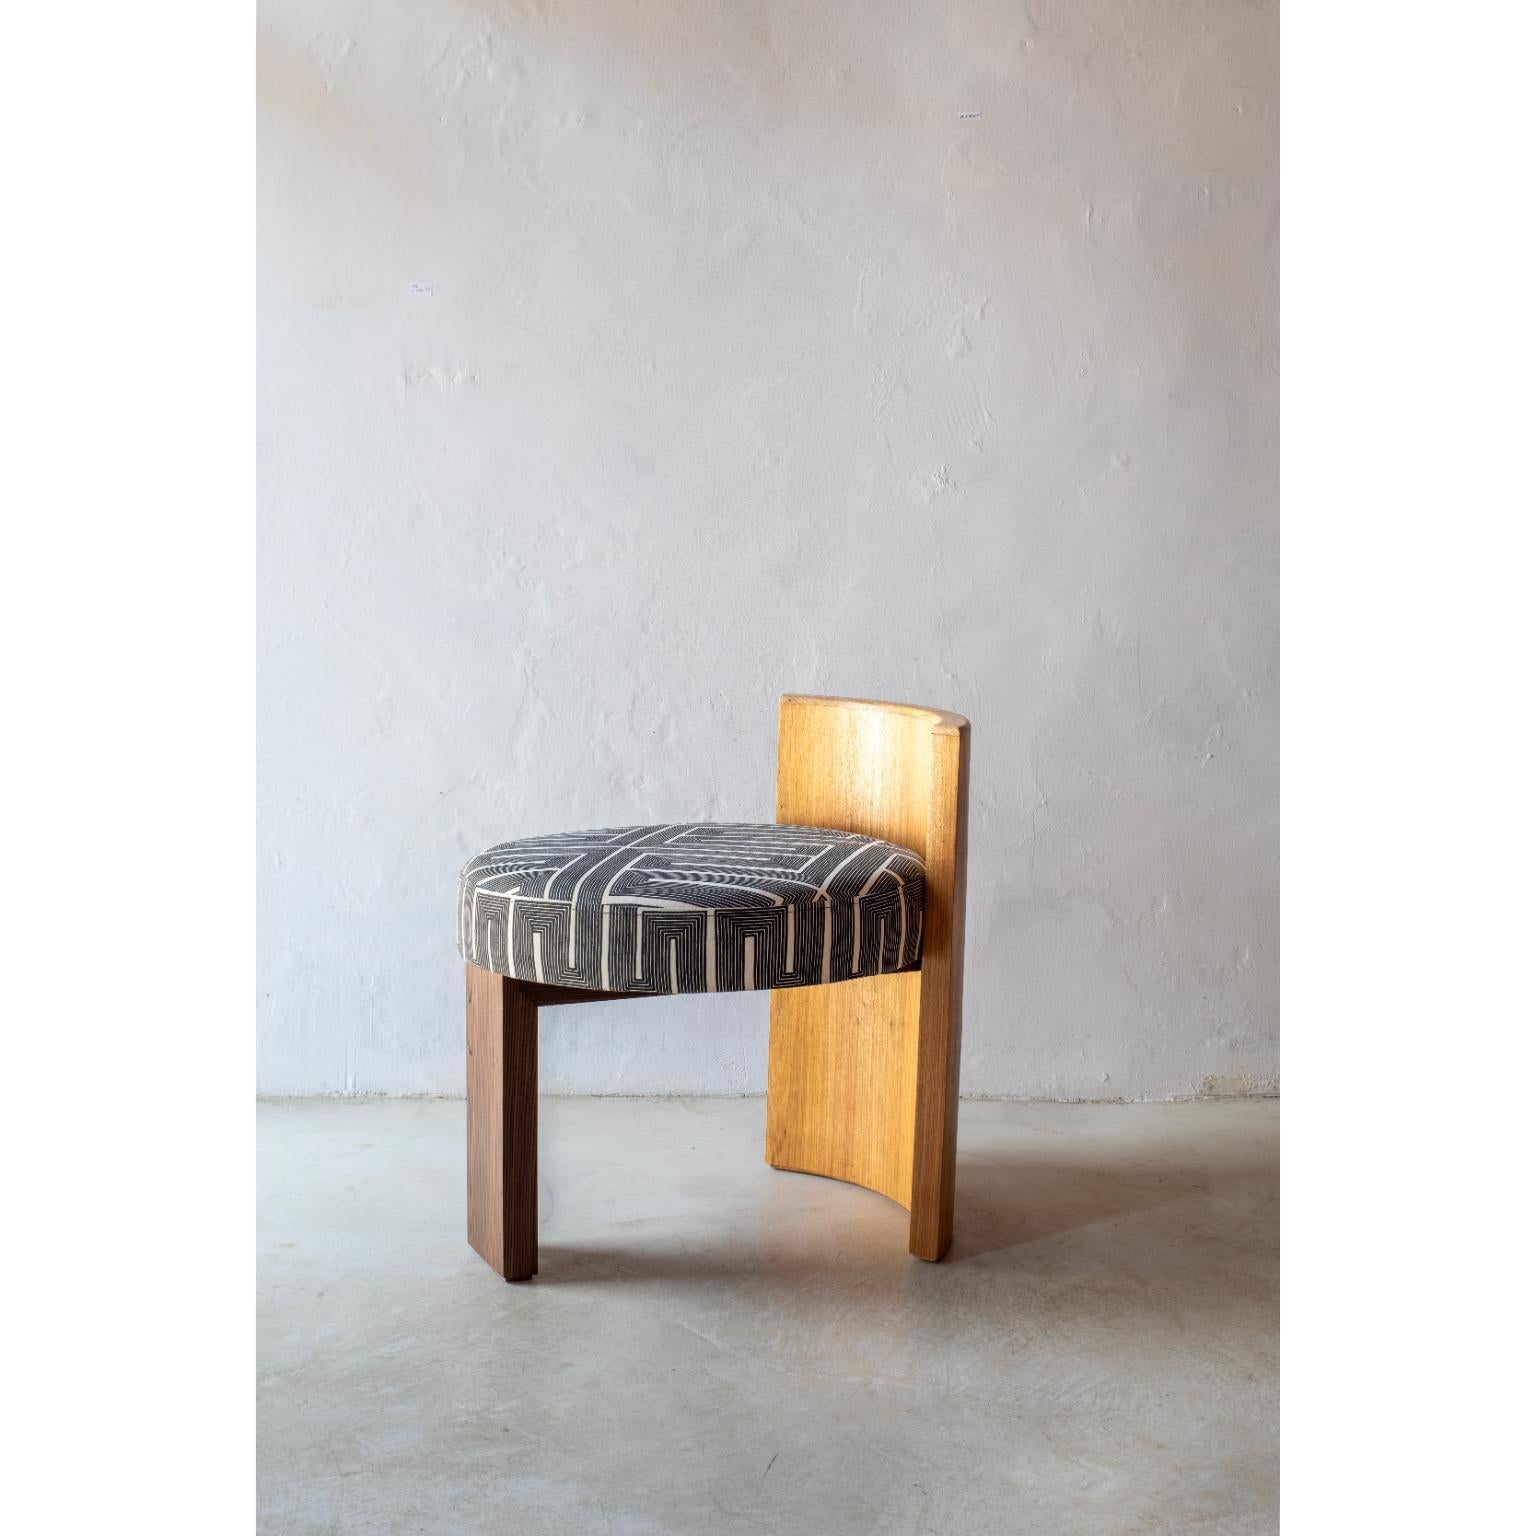 Aro Stool by Gabriela Campos
Dimensions: D 55 x W 55 x H 62 cm.
Materials: Freijó wood with imbuia finish and hand-painted fabric.

The essence of this capsule of 4 pieces is a dialog between the Art Déco
movement and the indigenous graphics of the